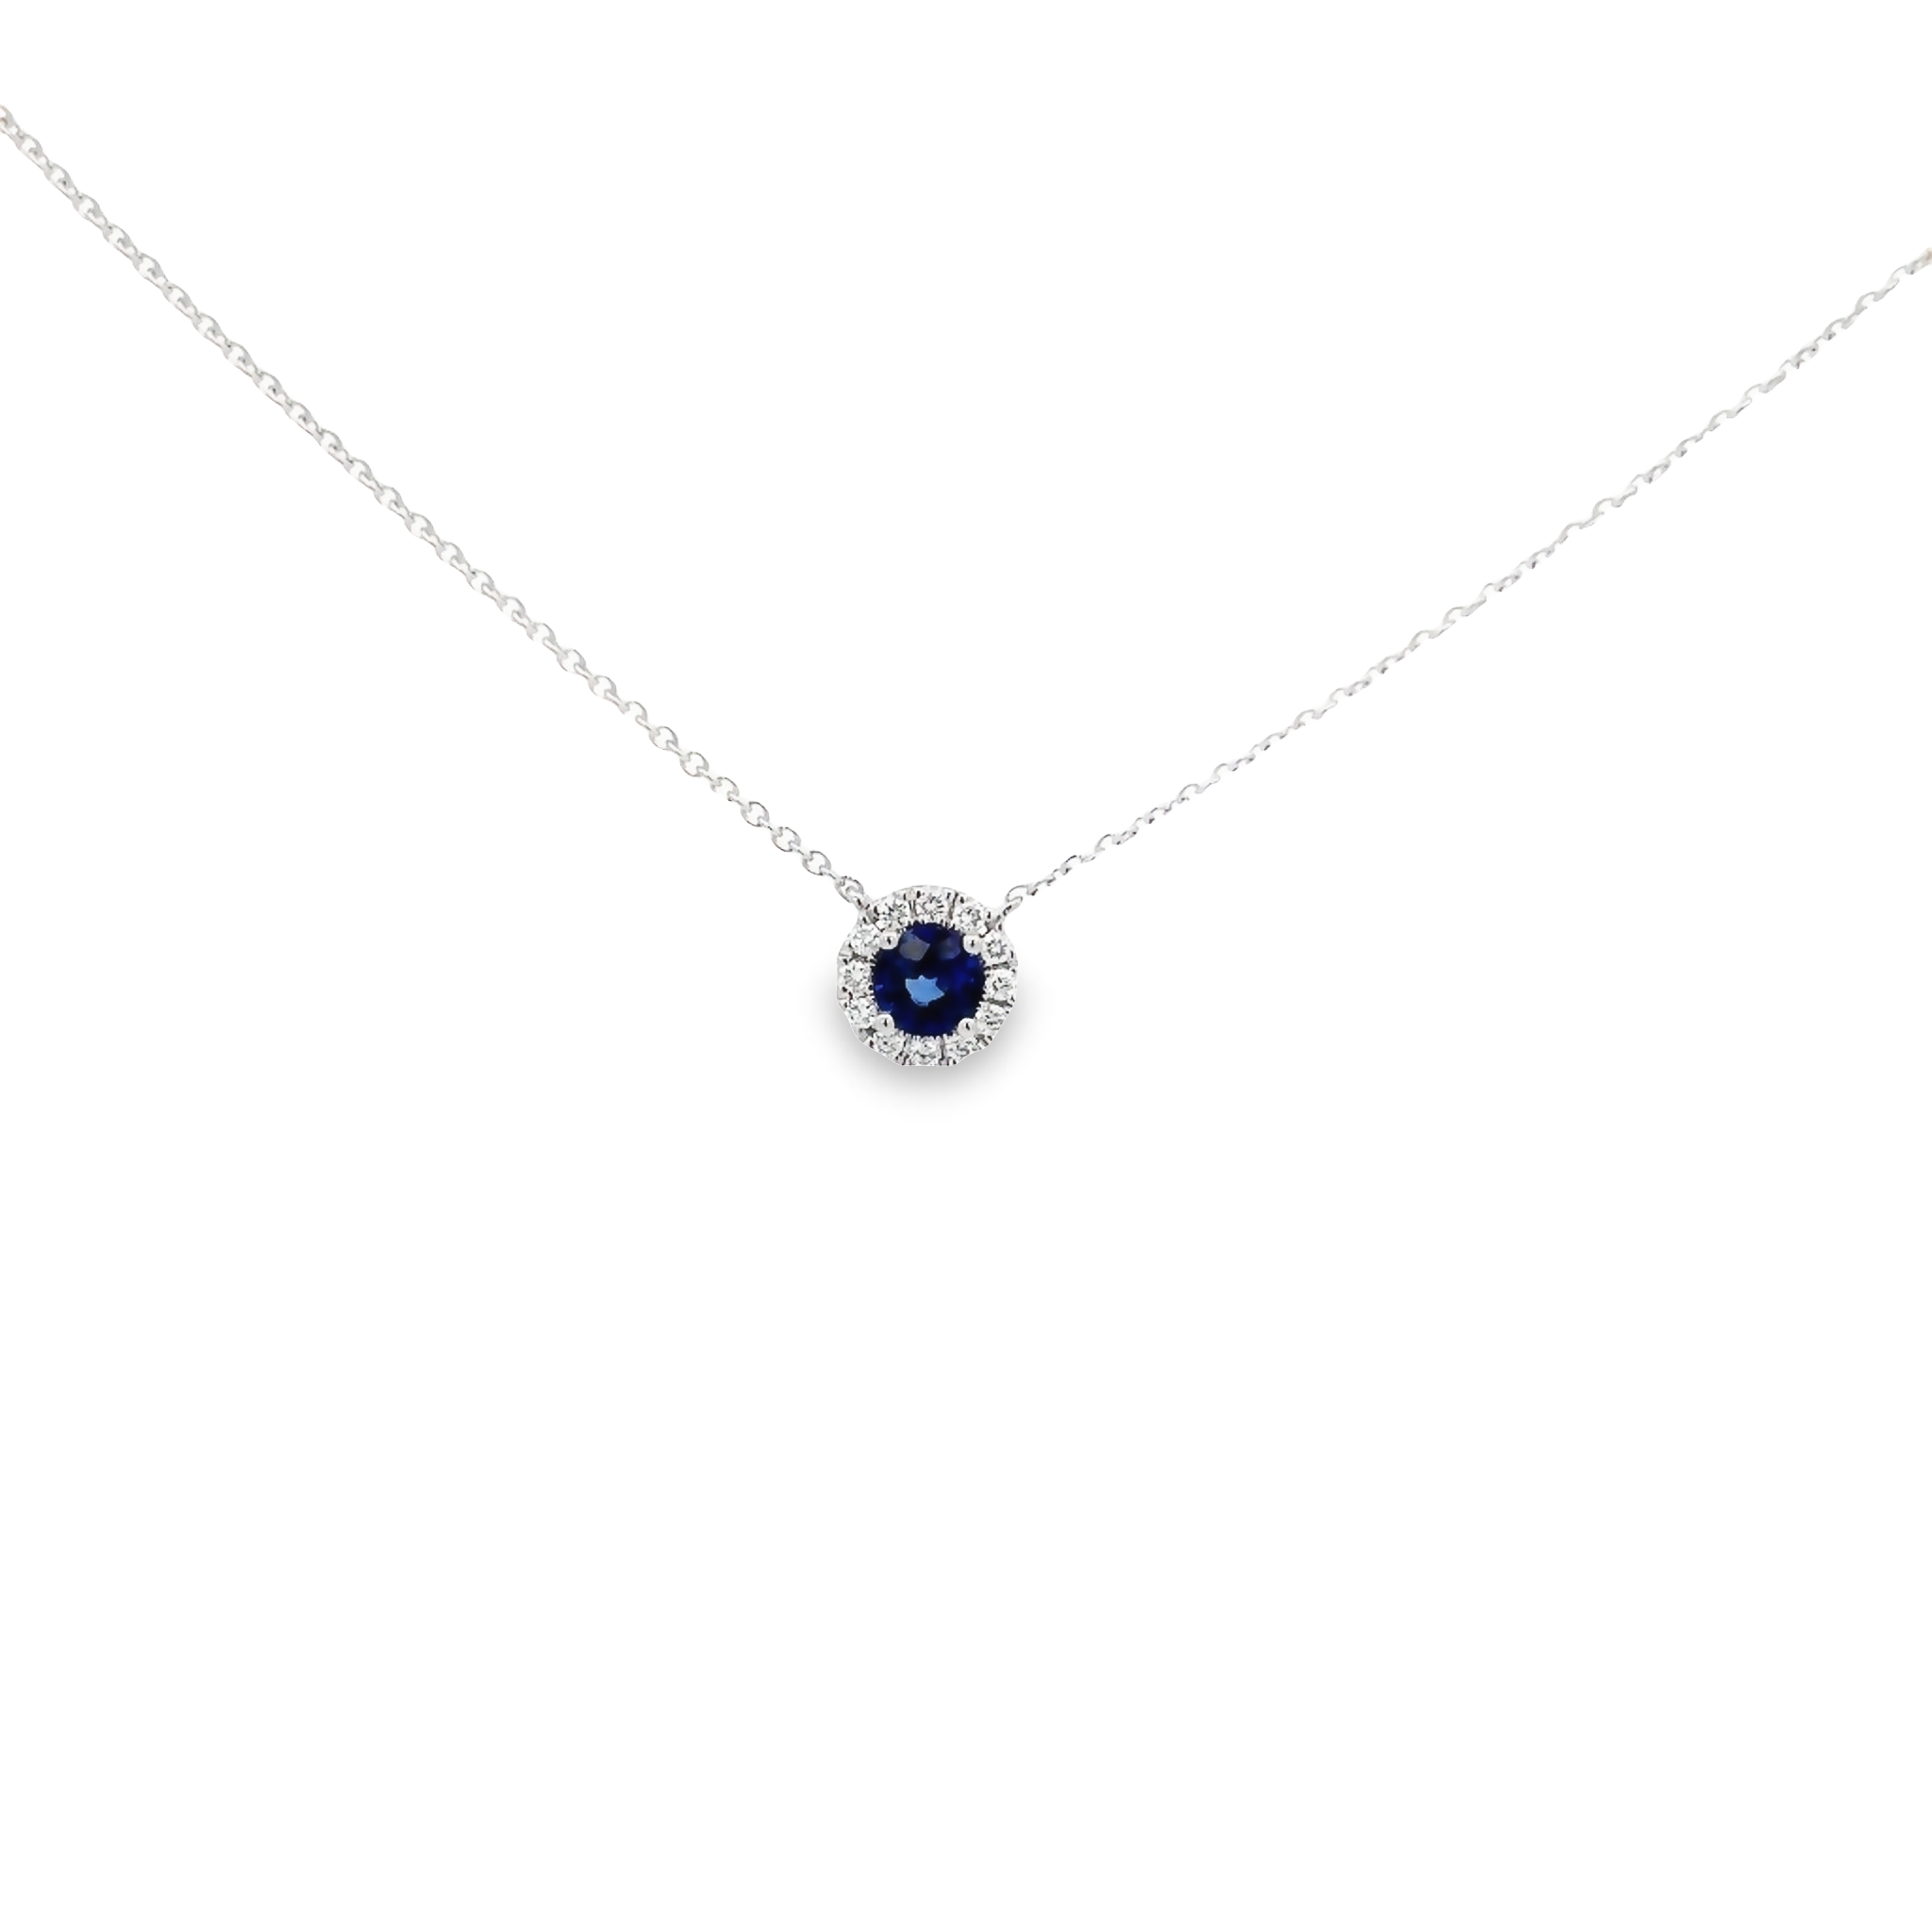 14 Karat White Gold Halo Pendant With One 0.57ct Round Mixed Cut Sapphire And 12=0.15 Total Weight Round Brilliant G Vs Diamonds